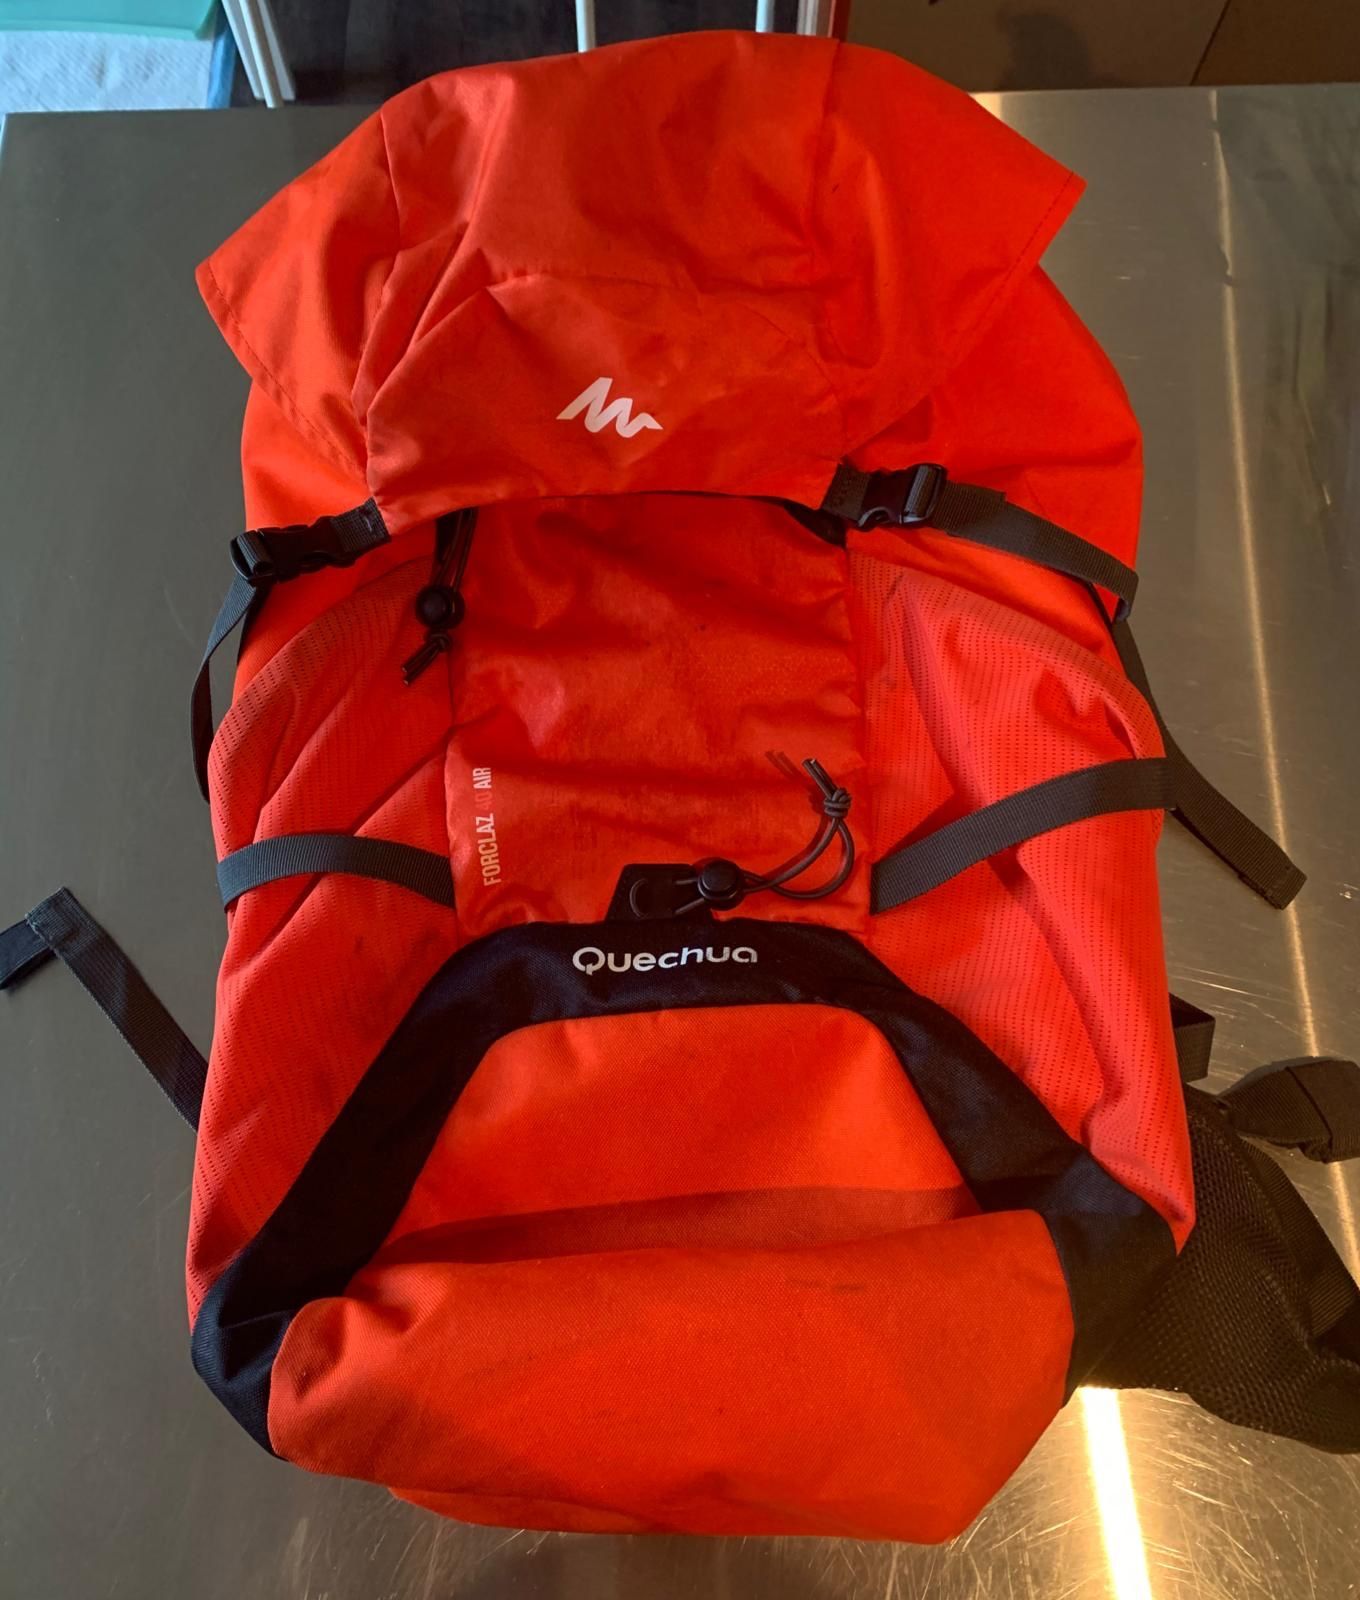 Hiking Backpack 40 L / 9 G - Price for 2